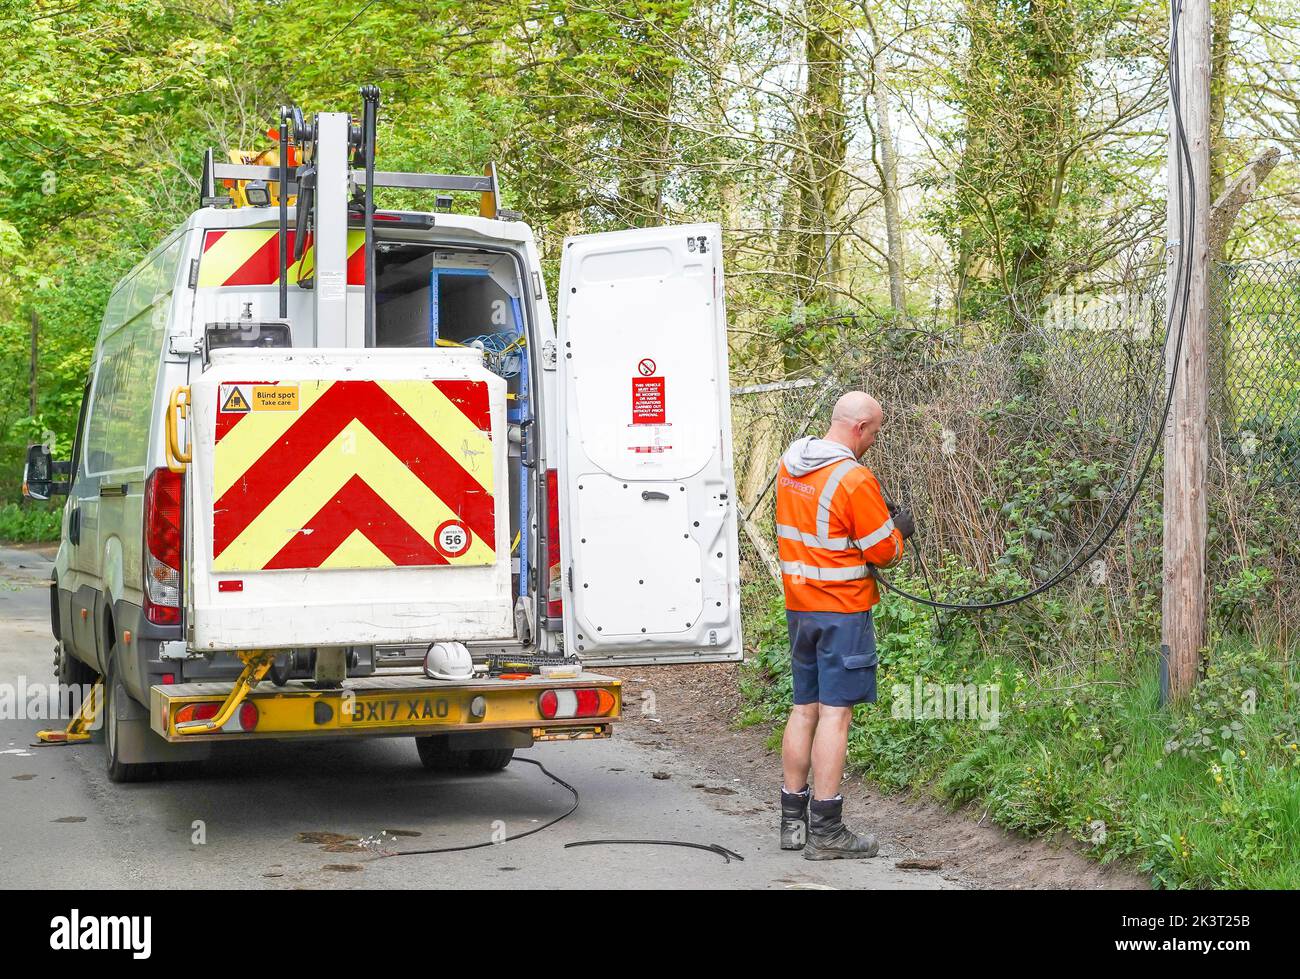 Rear view of BT Openreach vehicle, door open, and male worker fixing cable to a post in a UK country lane. Stock Photo